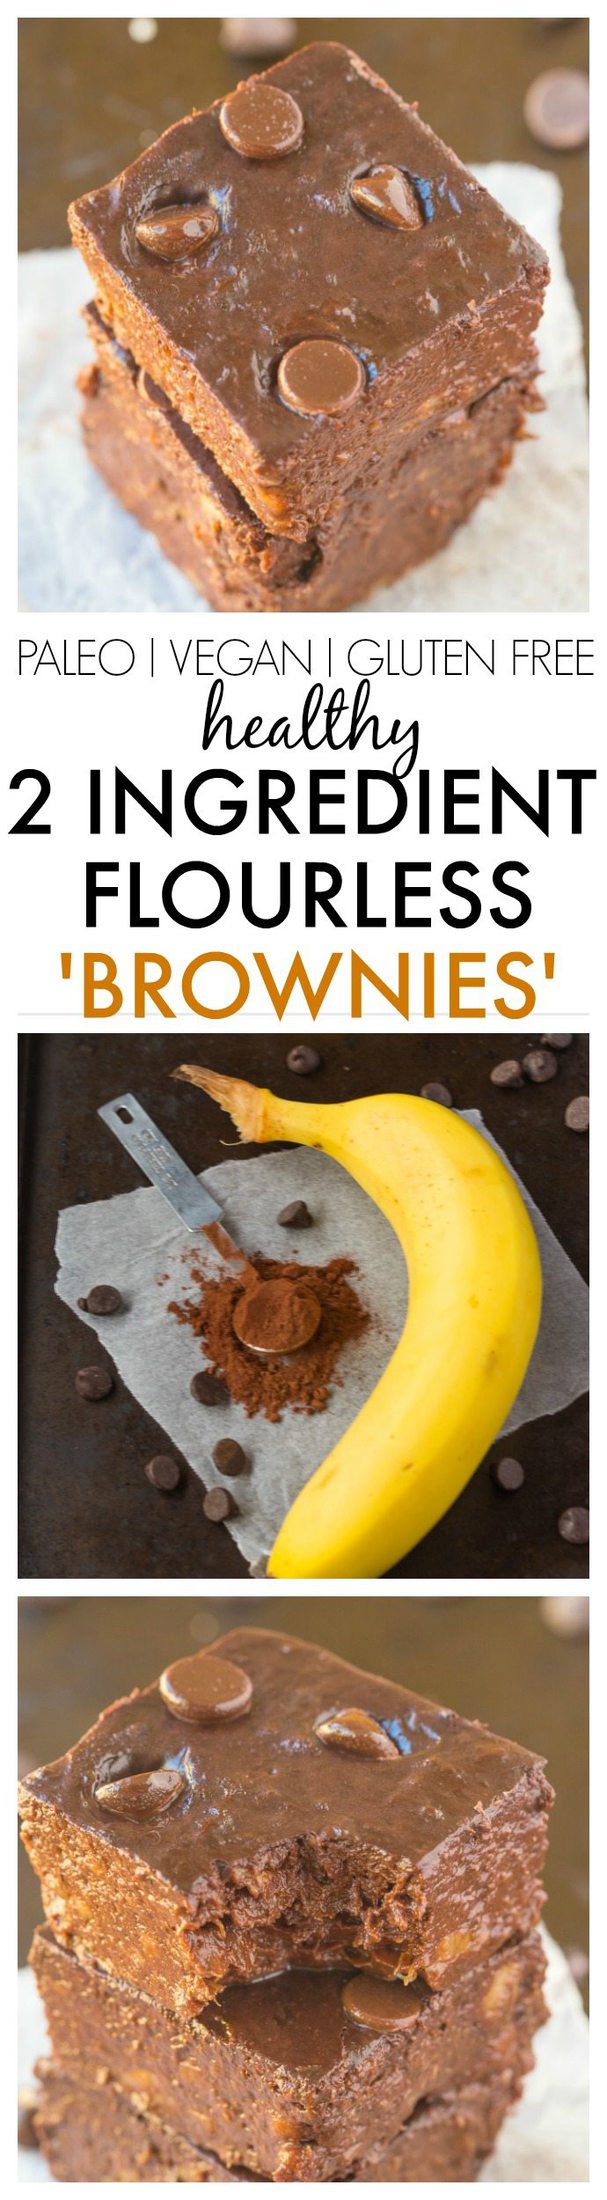 Healthy 2 Ingredient Flourless Brownies made with NO BOXED mix- Just Bananas and cocoa powder! SO EASY and the cure for any sweet tooth! {vegan, gluten free, paleo recipe}- thebigmansworld.com